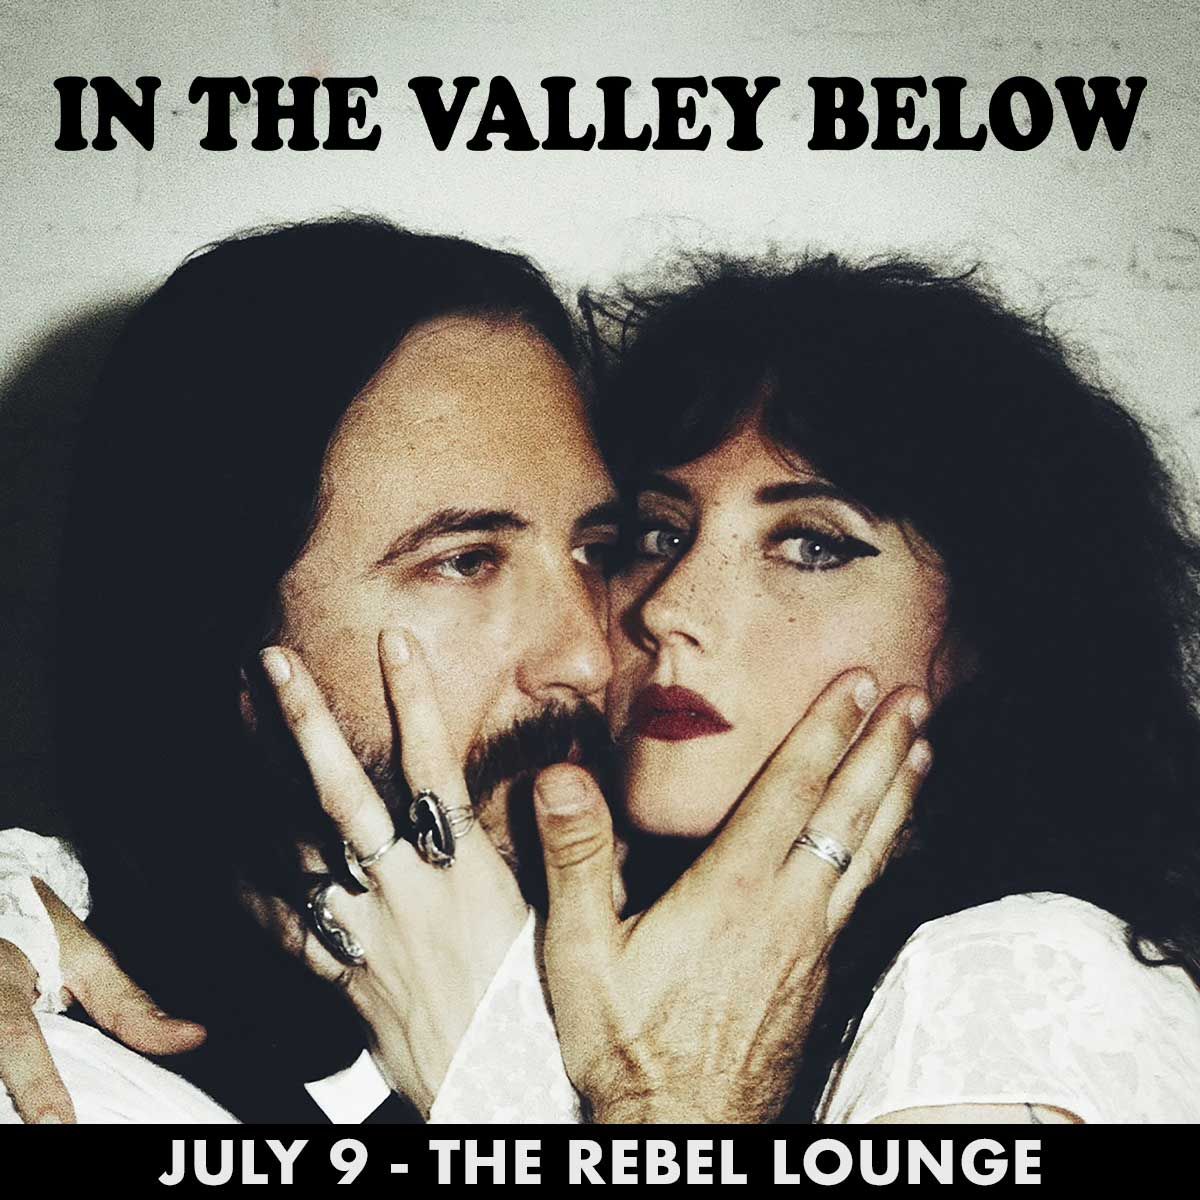 IN THE VALLEY BELOW at The Rebel Lounge